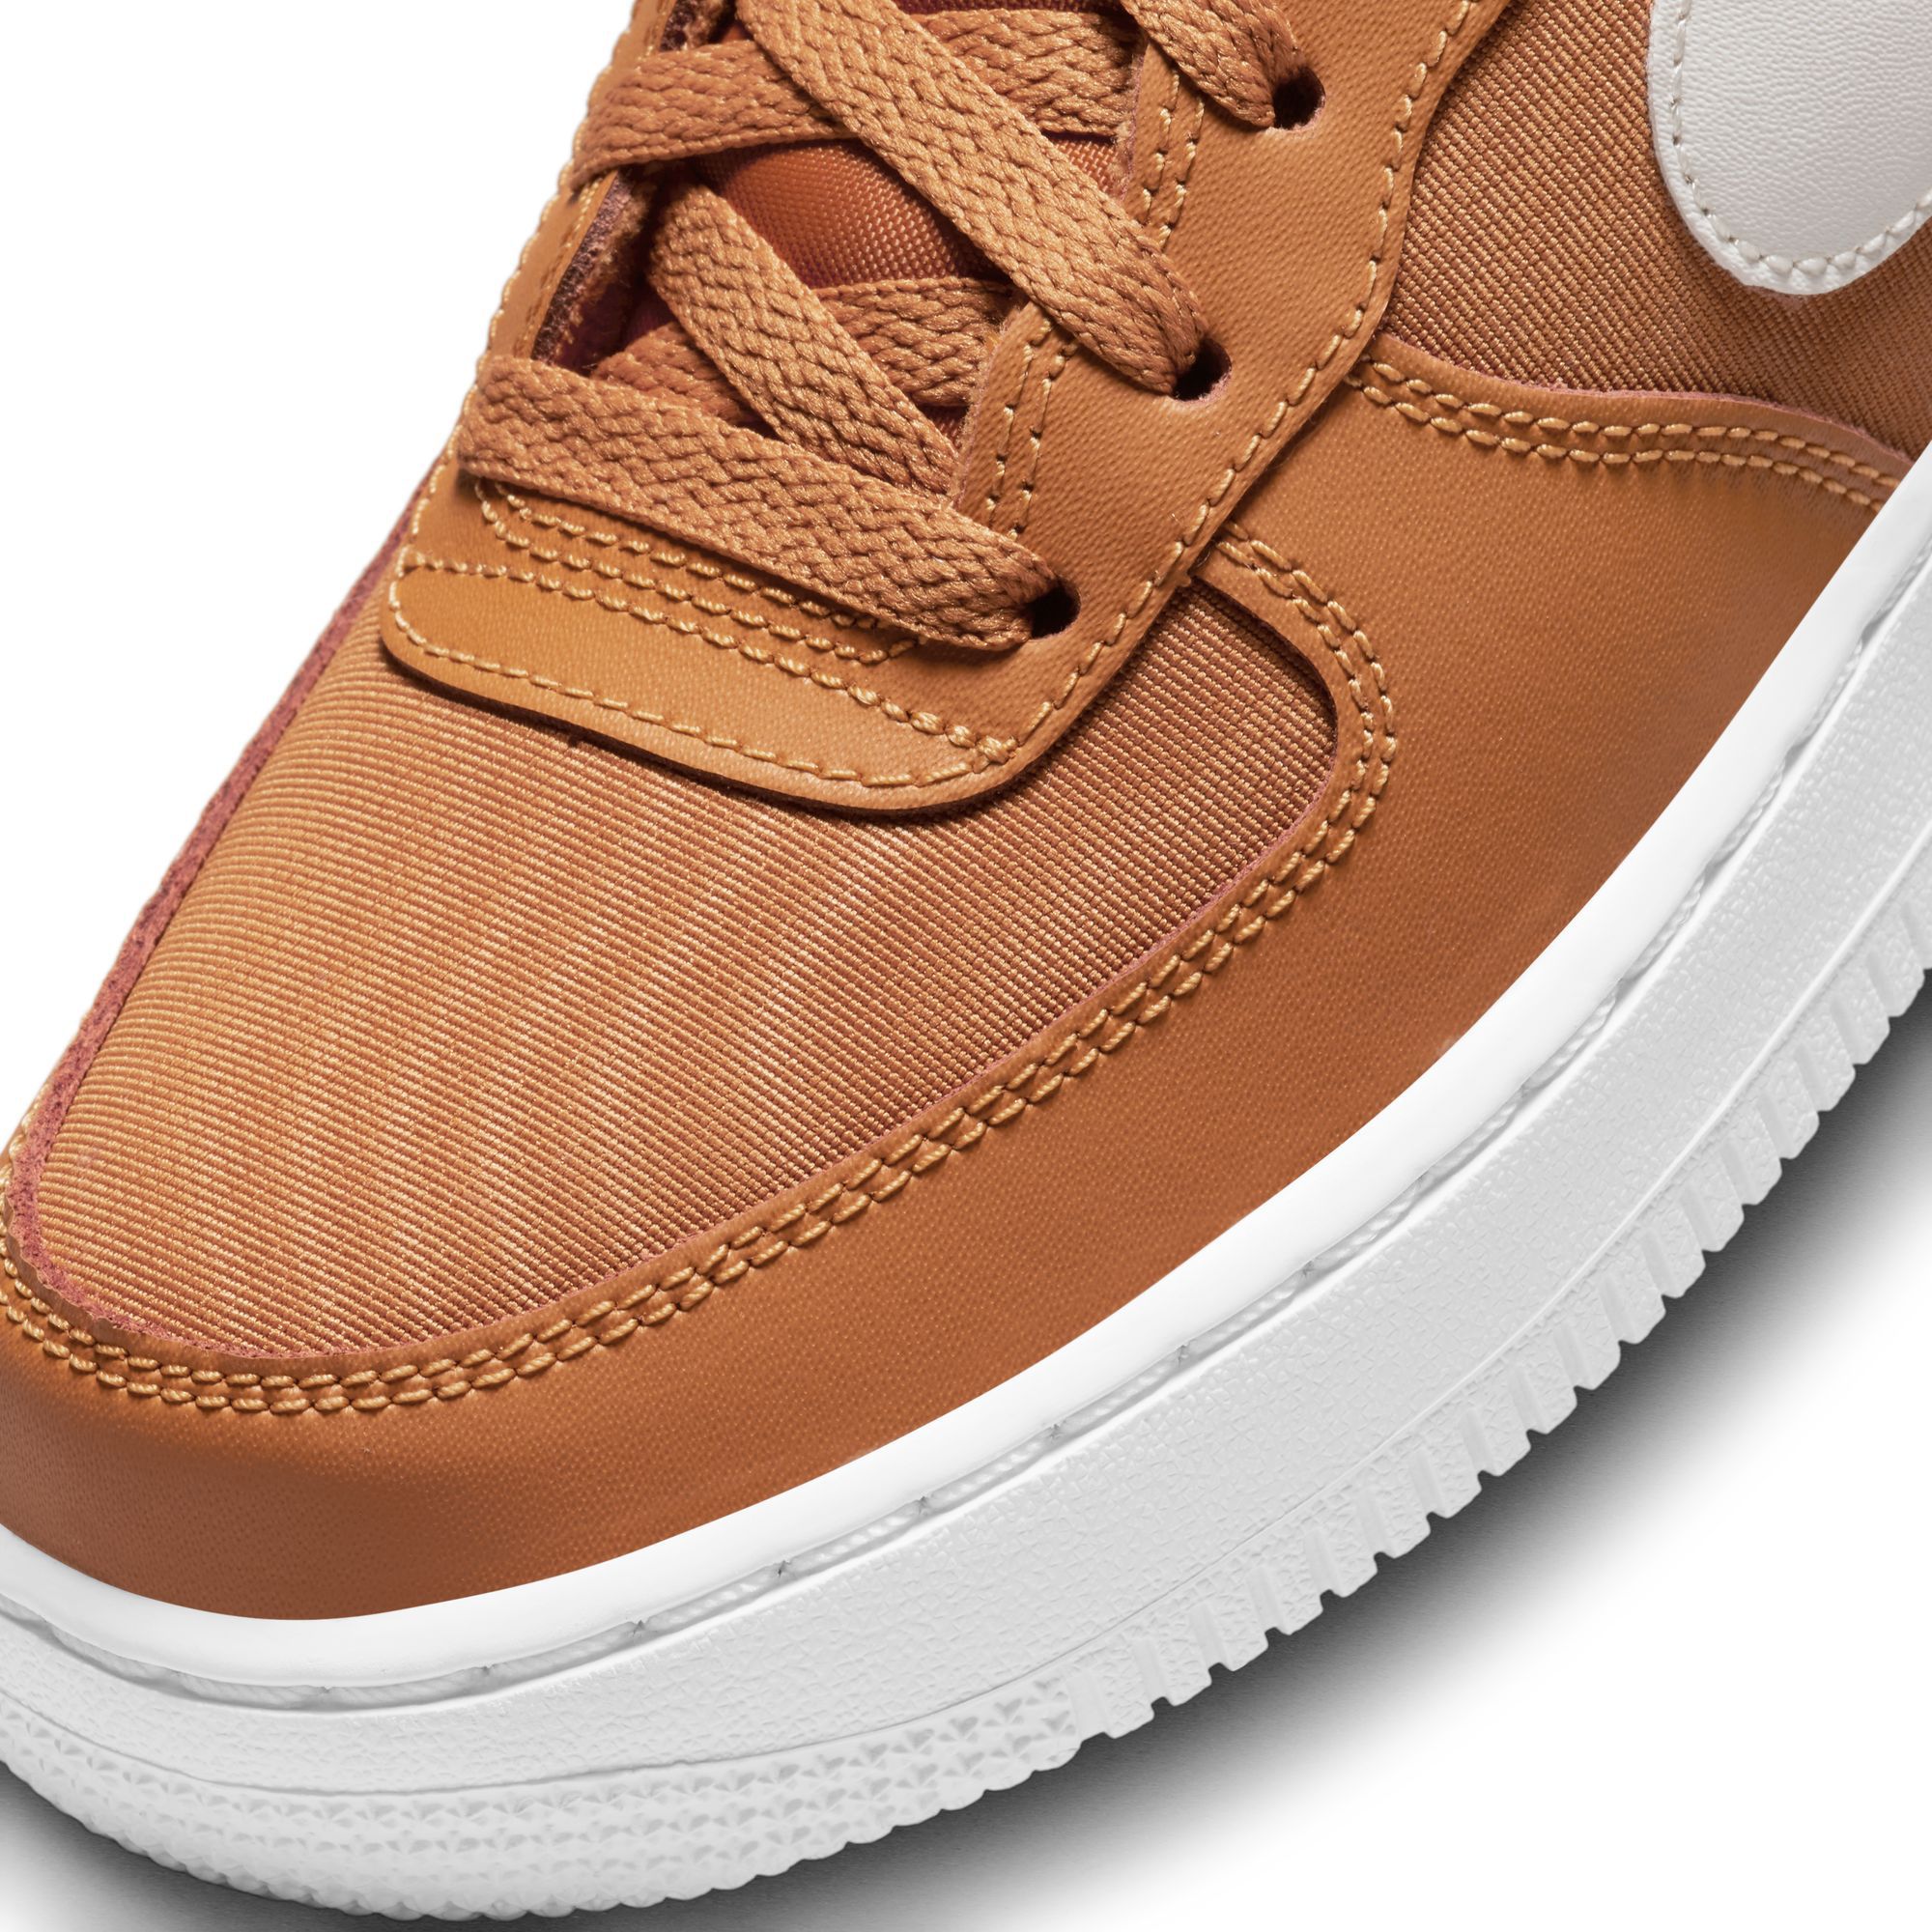 Nike Air Force 1 LV8 Style Big Kids' Shoes in Monarch/Gum Medium Brown, Size: 6.5Y | AR0735-800